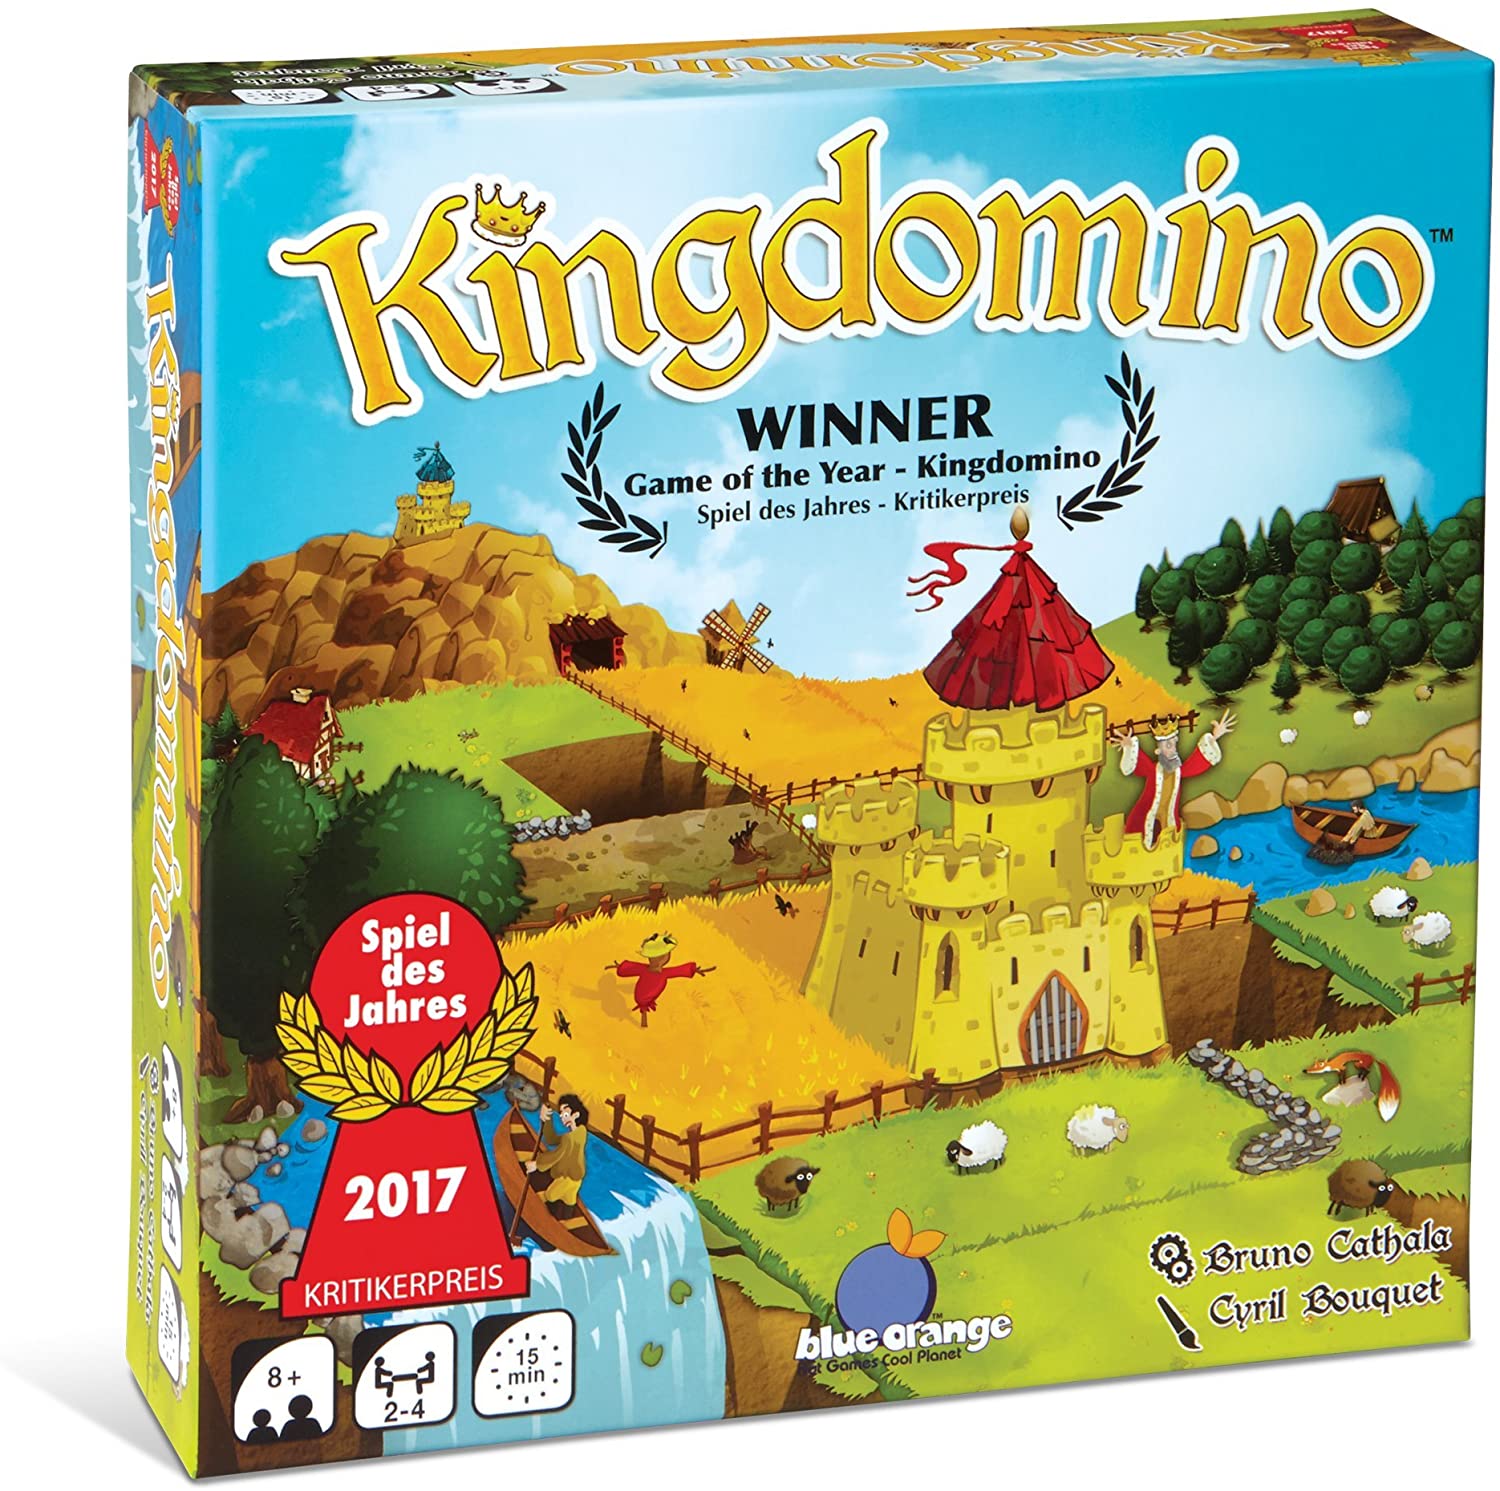 Kingdomino is a board game where players use the gameplay of dominos to build kingdoms. Whomever has the biggest and most valuable kingdom wins the game.